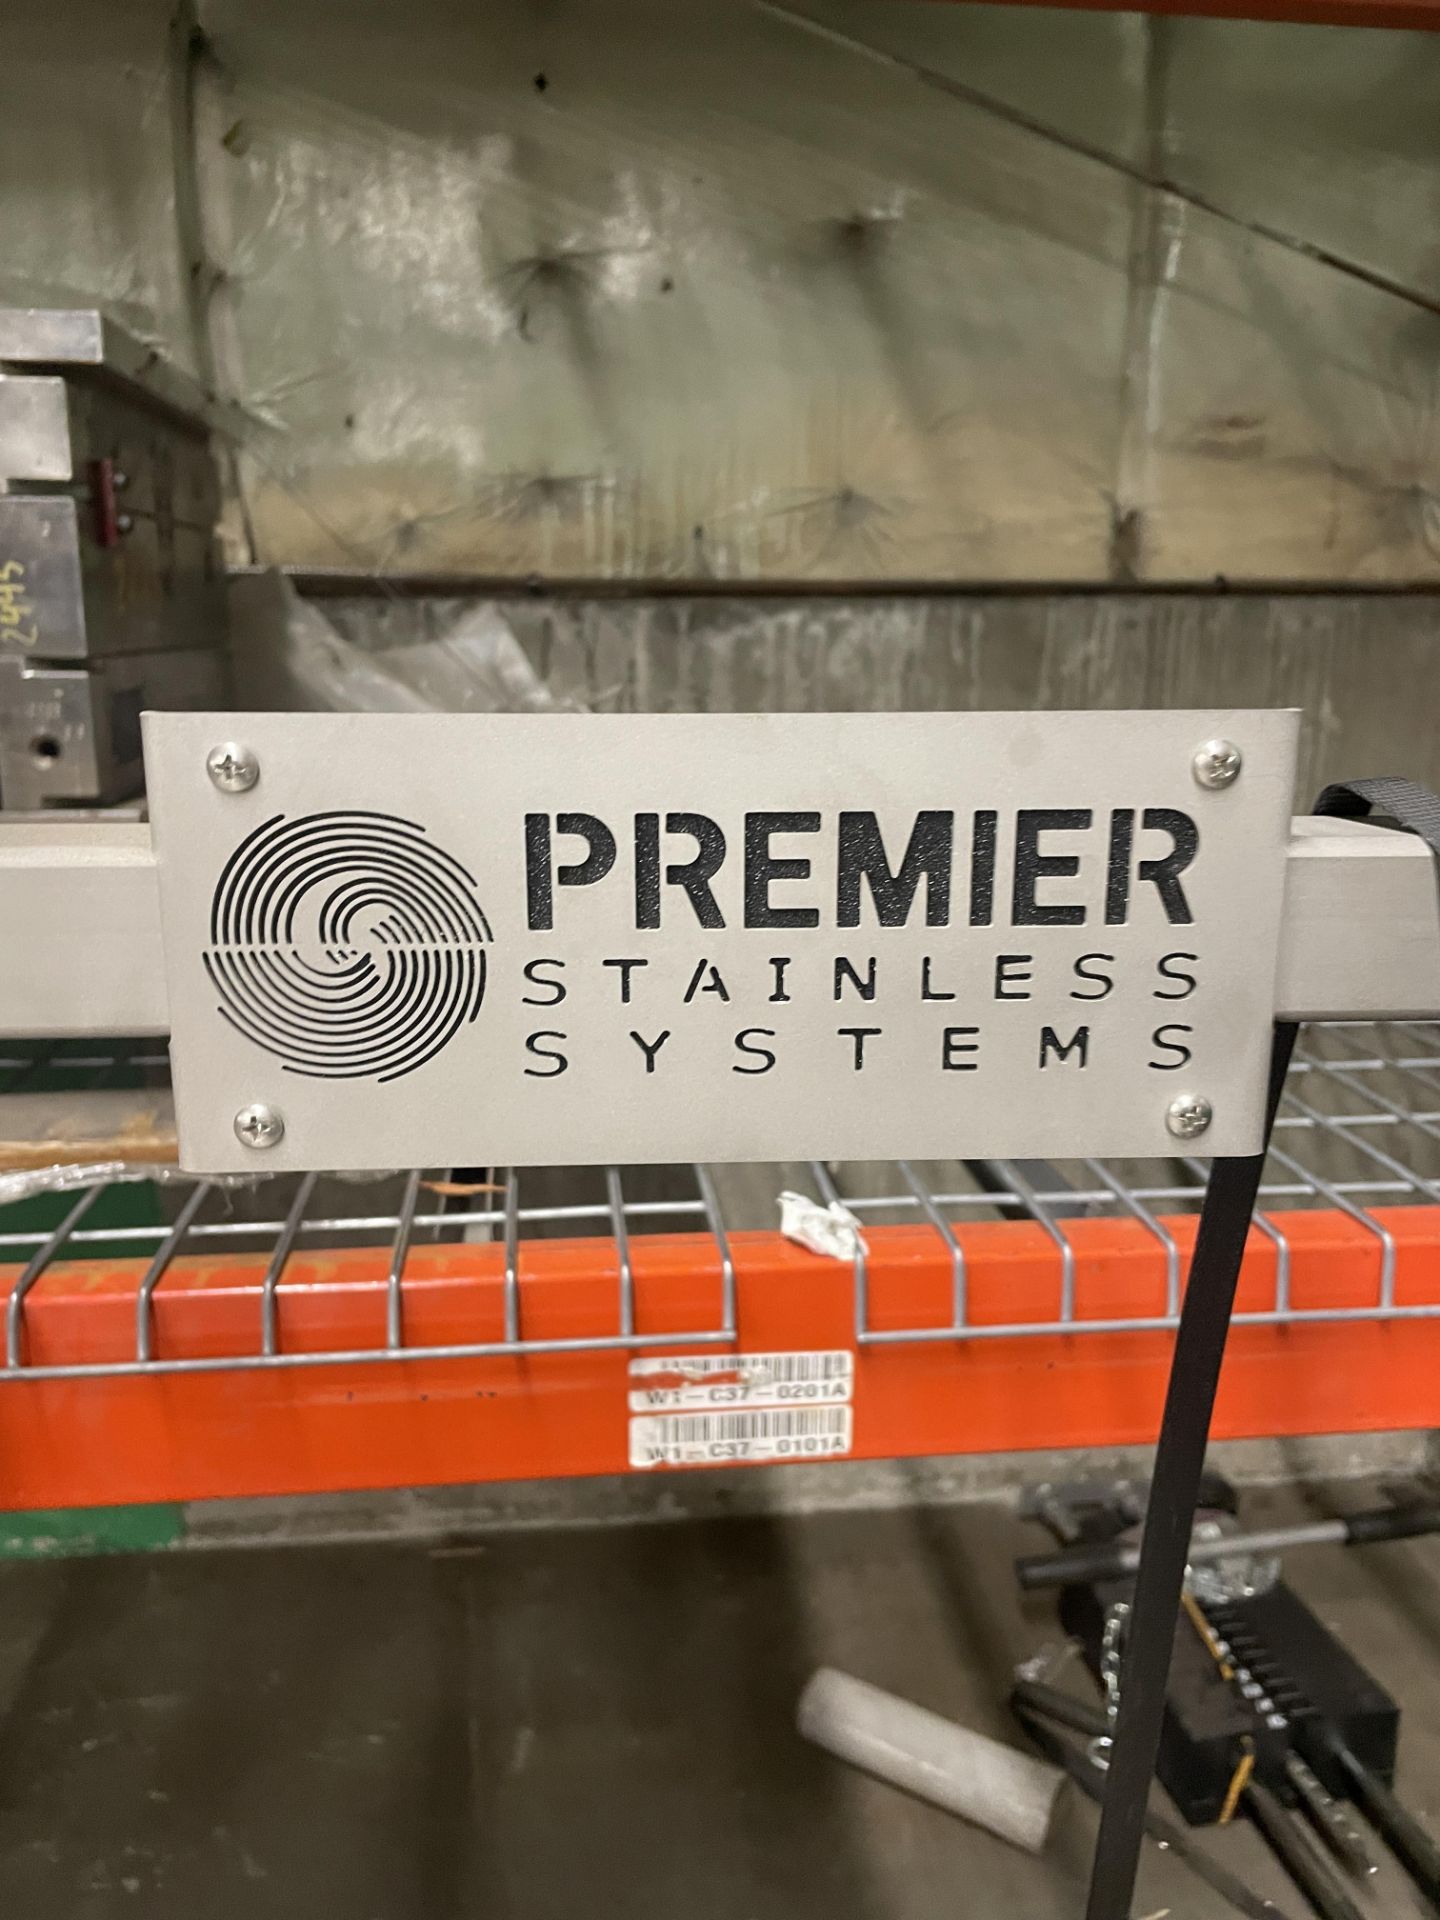 2020 Premier #KW-SA-3V-CS-A 3 Head Stainless Keg Washer, 3 Phase, 208-230VAC, 60Hz, S/N: 20KW019 (Se - Image 5 of 17